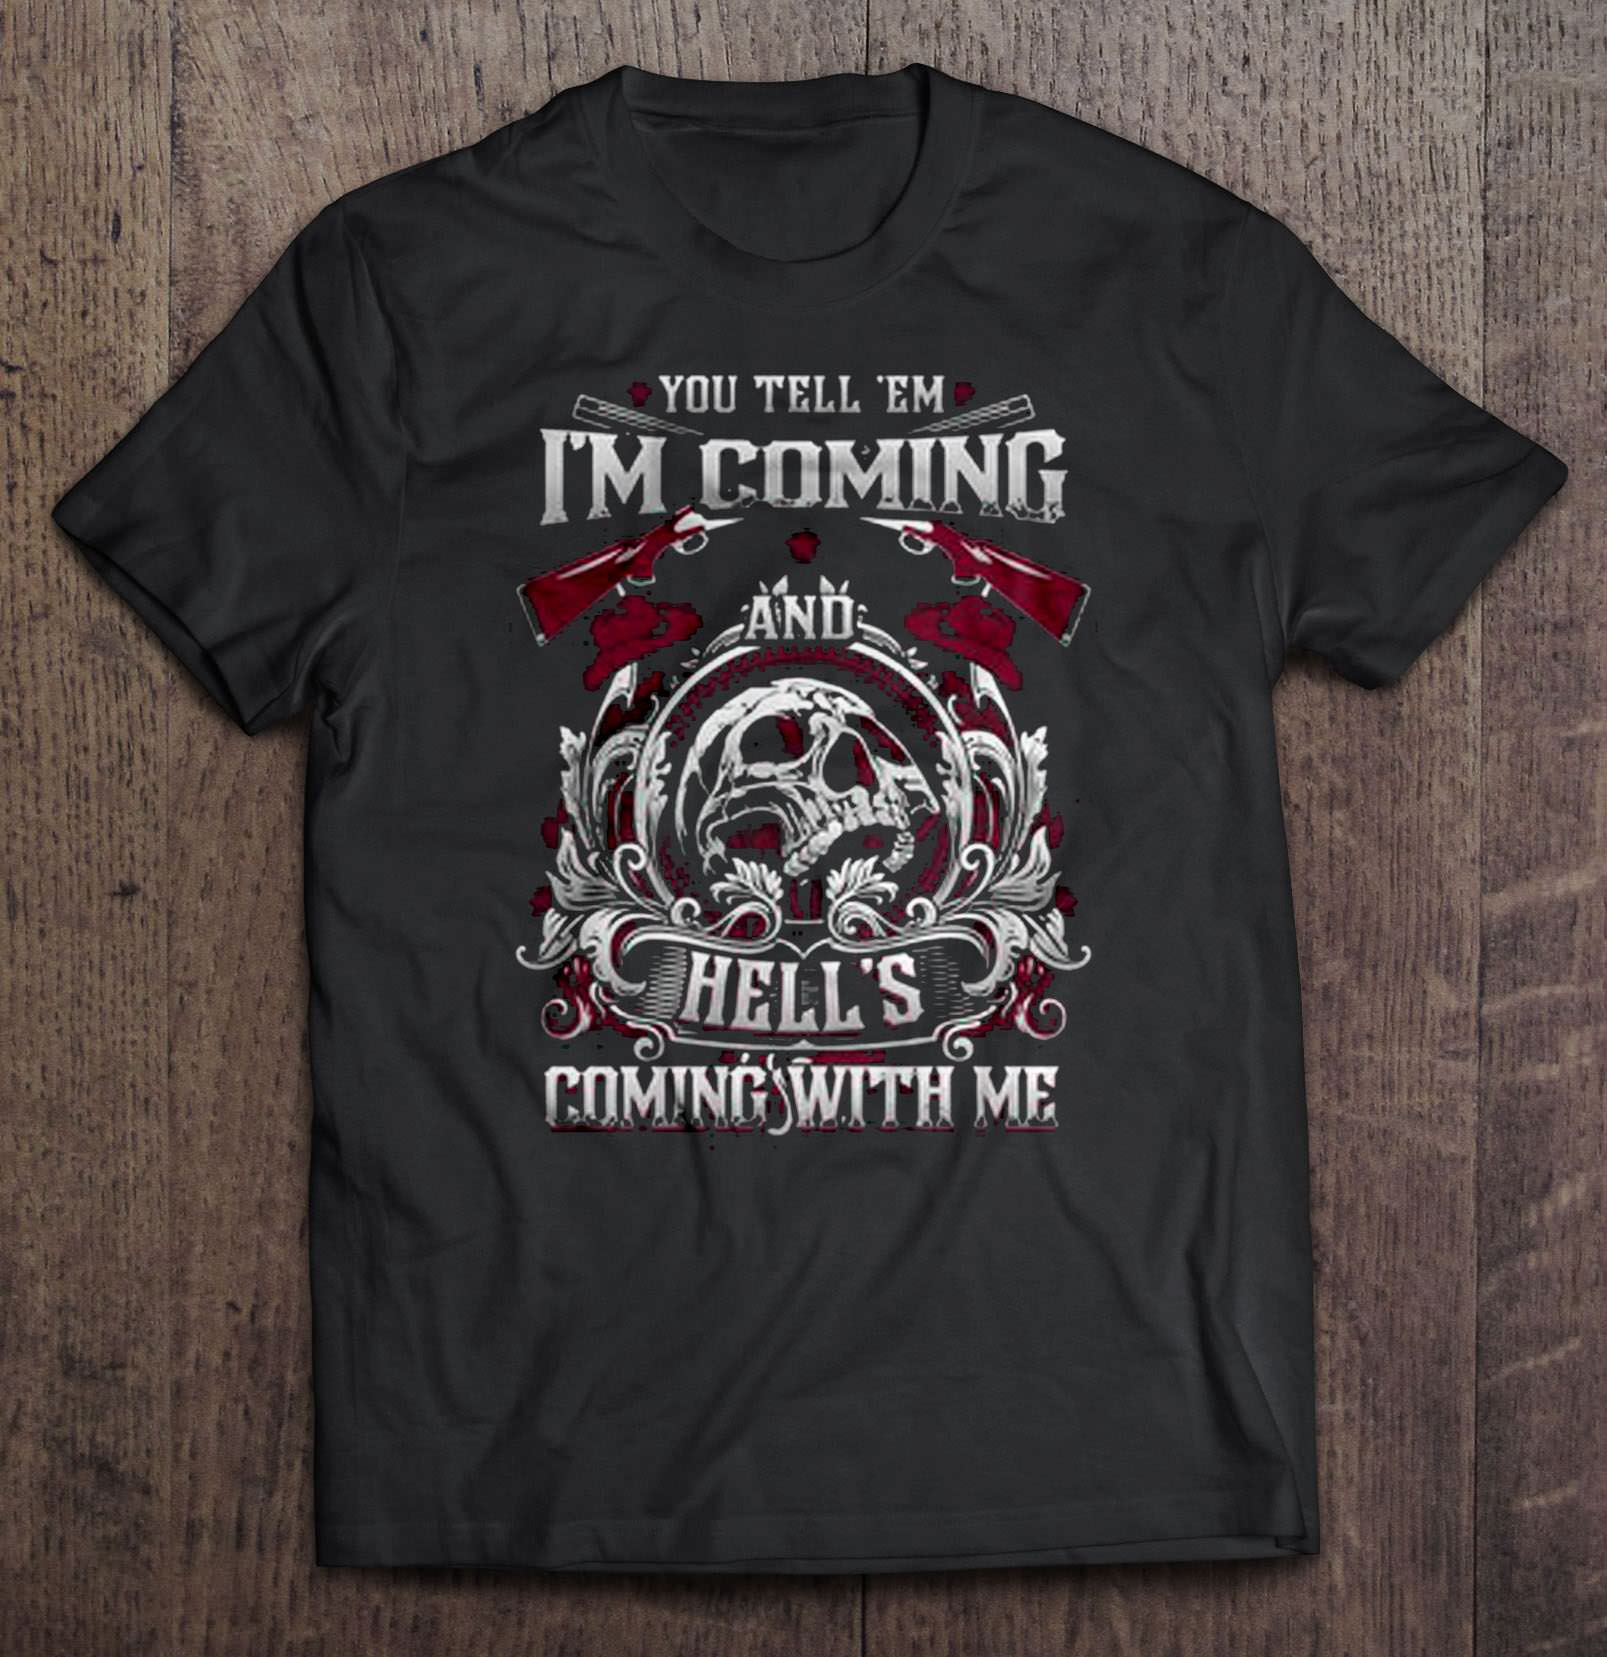 You Tell Em I'm Coming And Hell's Coming With Me Version2 Shirt ...